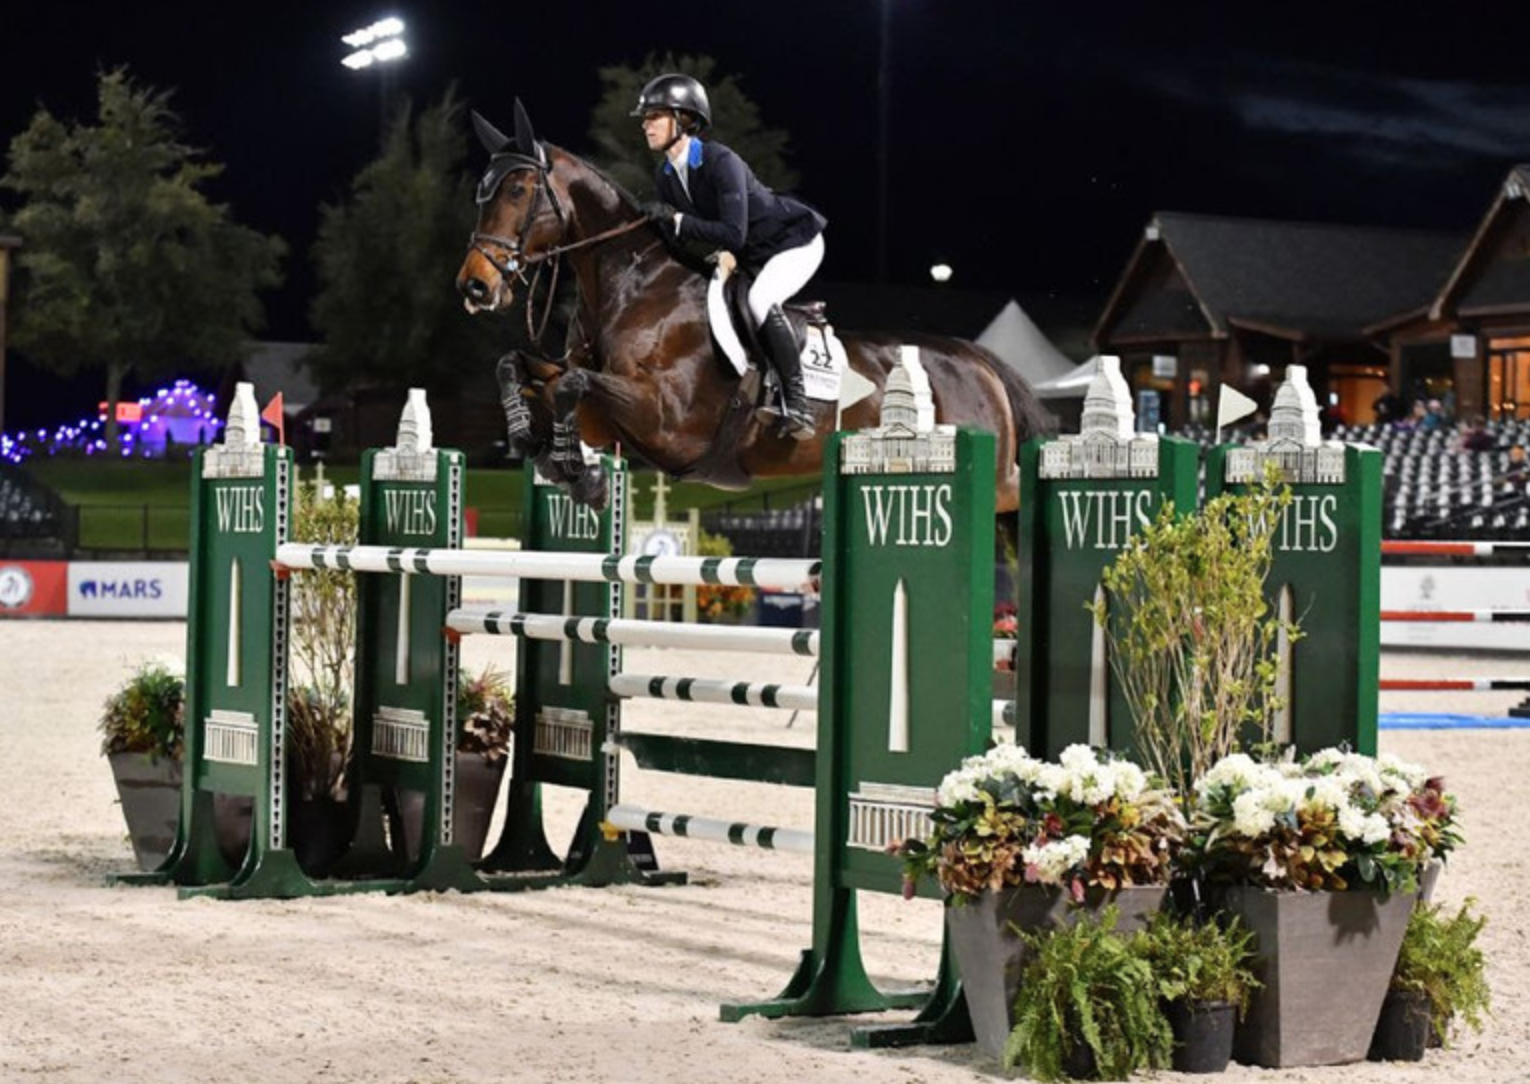 Sydney Shulman and Villamoura earn repeat victory in the $50,000 International Jumper Speed Final at 2021 WIHS